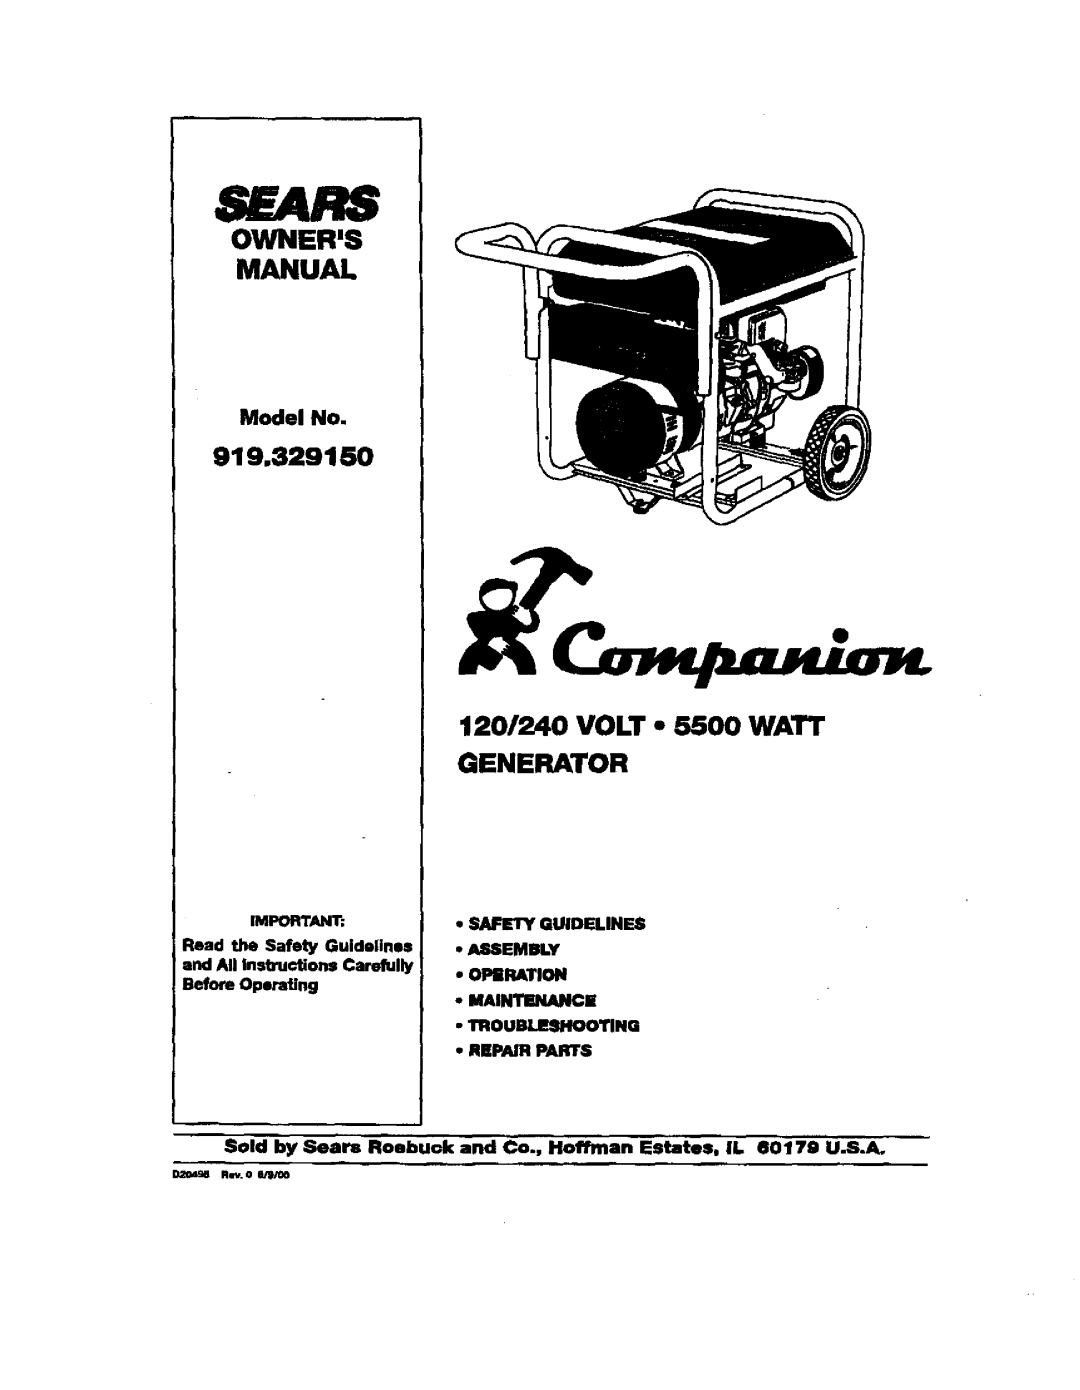 Sears owner manual Sears, 120/240 VOLT 5500 WATT GENERATOR, 919,329150, m4PORTANT, Safety Guidelines, Assembly 